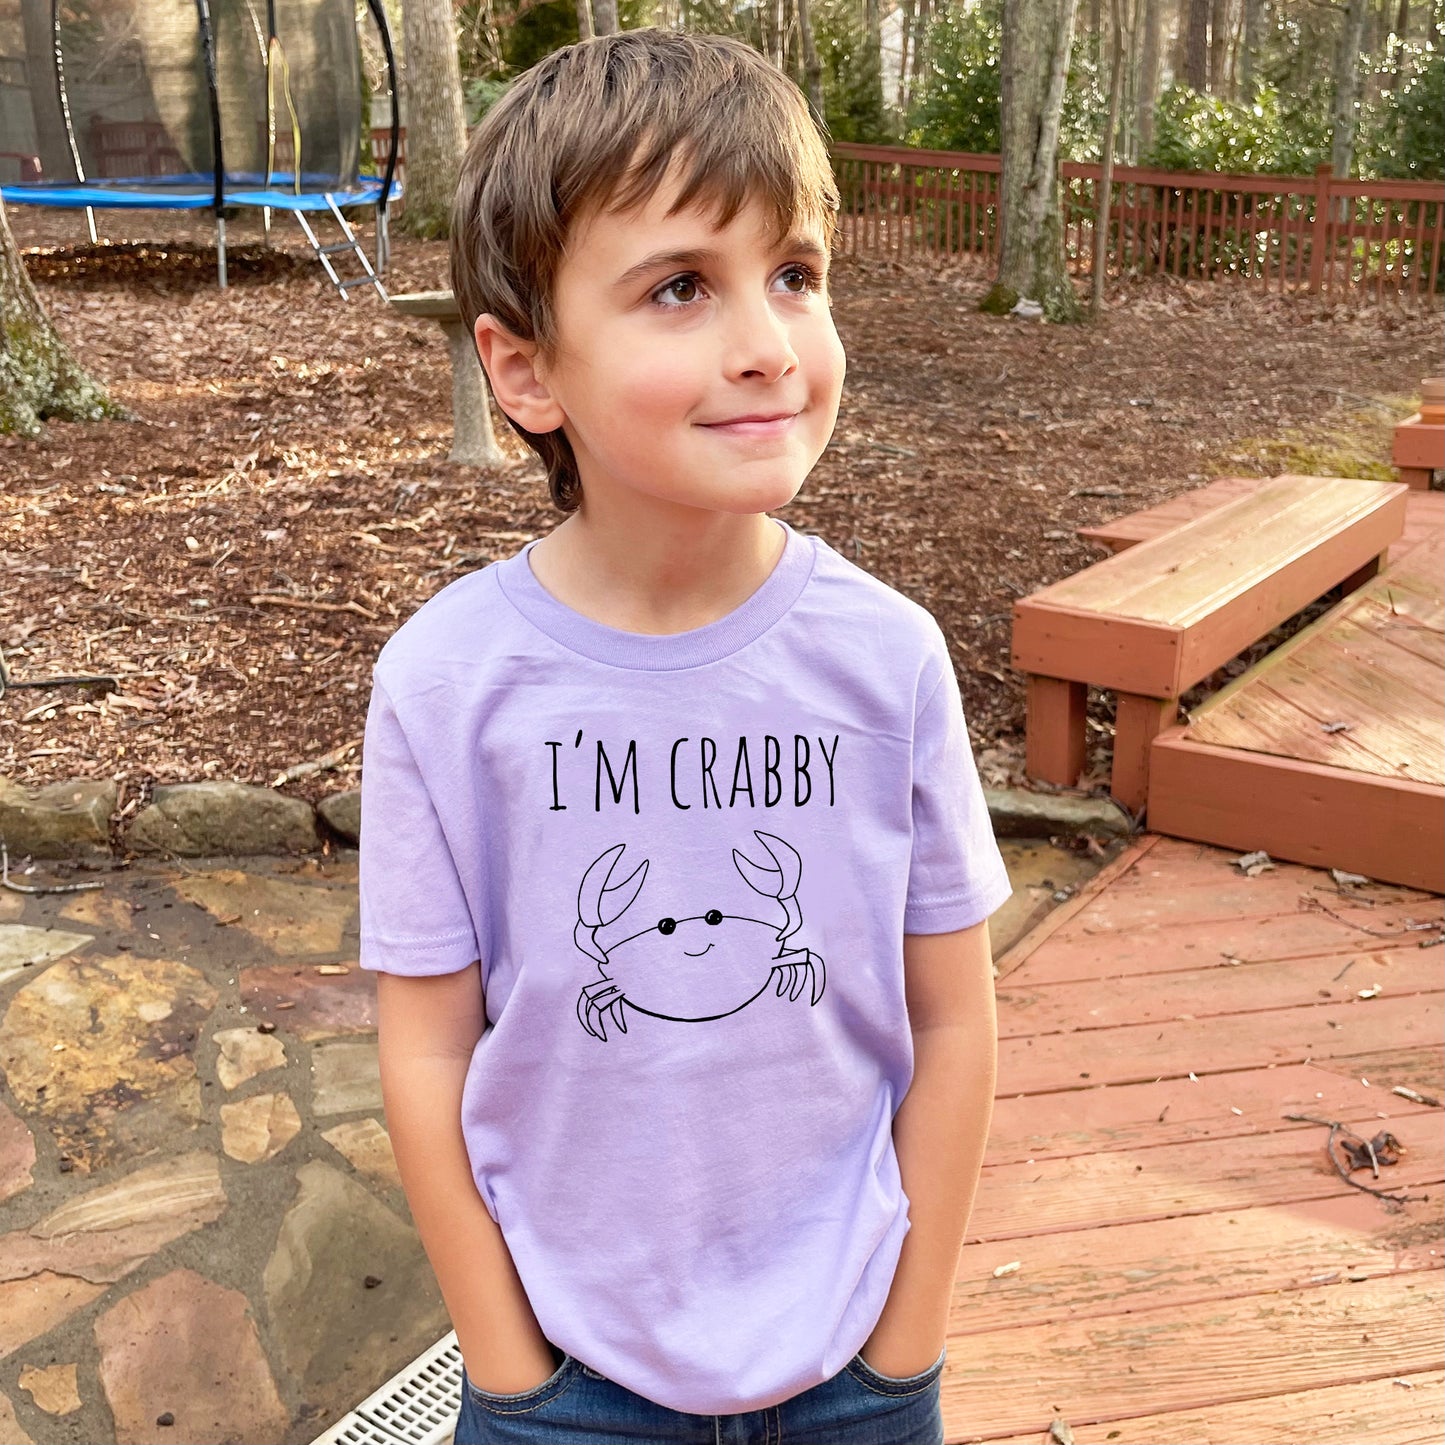 I'm Crabby - Kid's Tee - Columbia Blue or Lavender